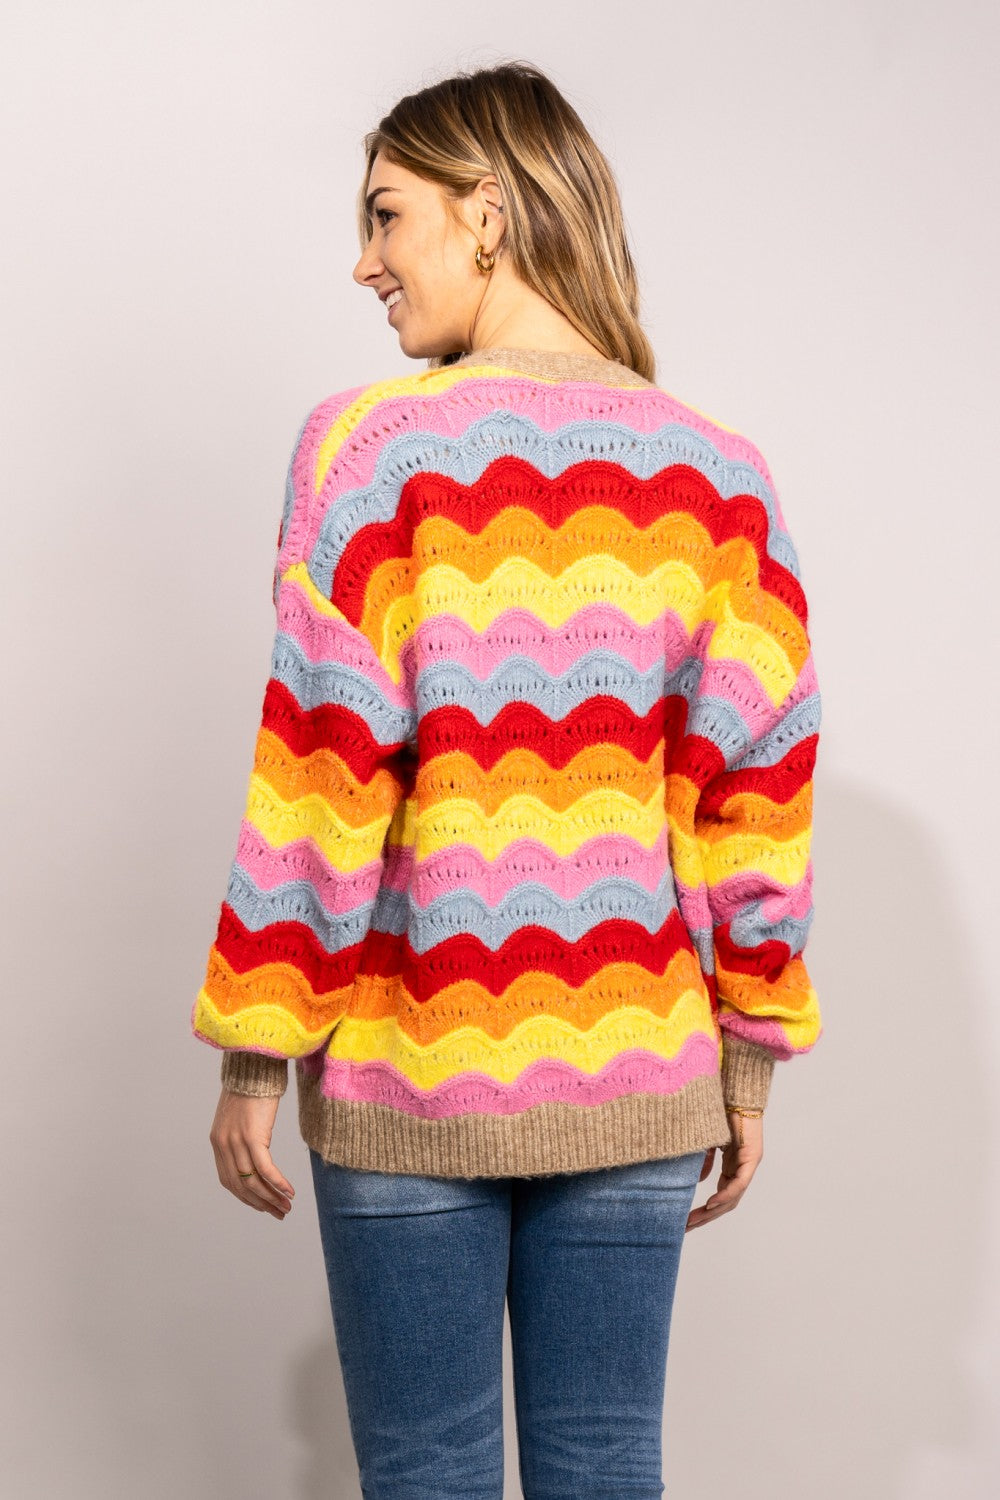 Trendsi Cupid Beauty Supplies Woman Cardigan ee:some Rainbow Stripe Dropped Shoulder Open Front Cardigan